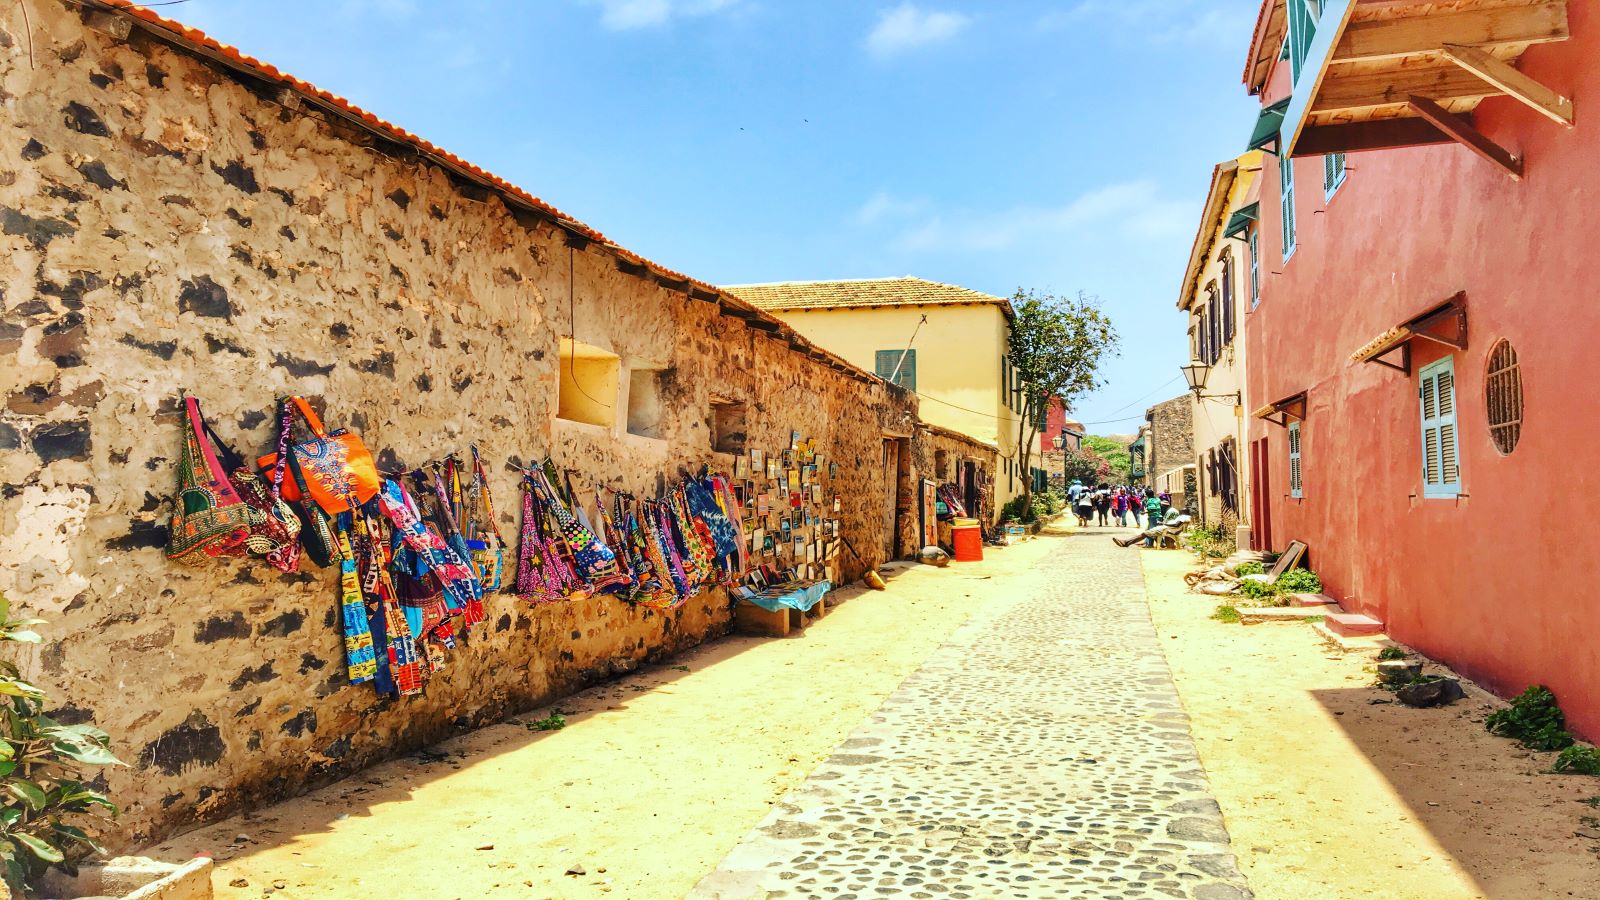 Picturesque views from the island of Goree, Senegal